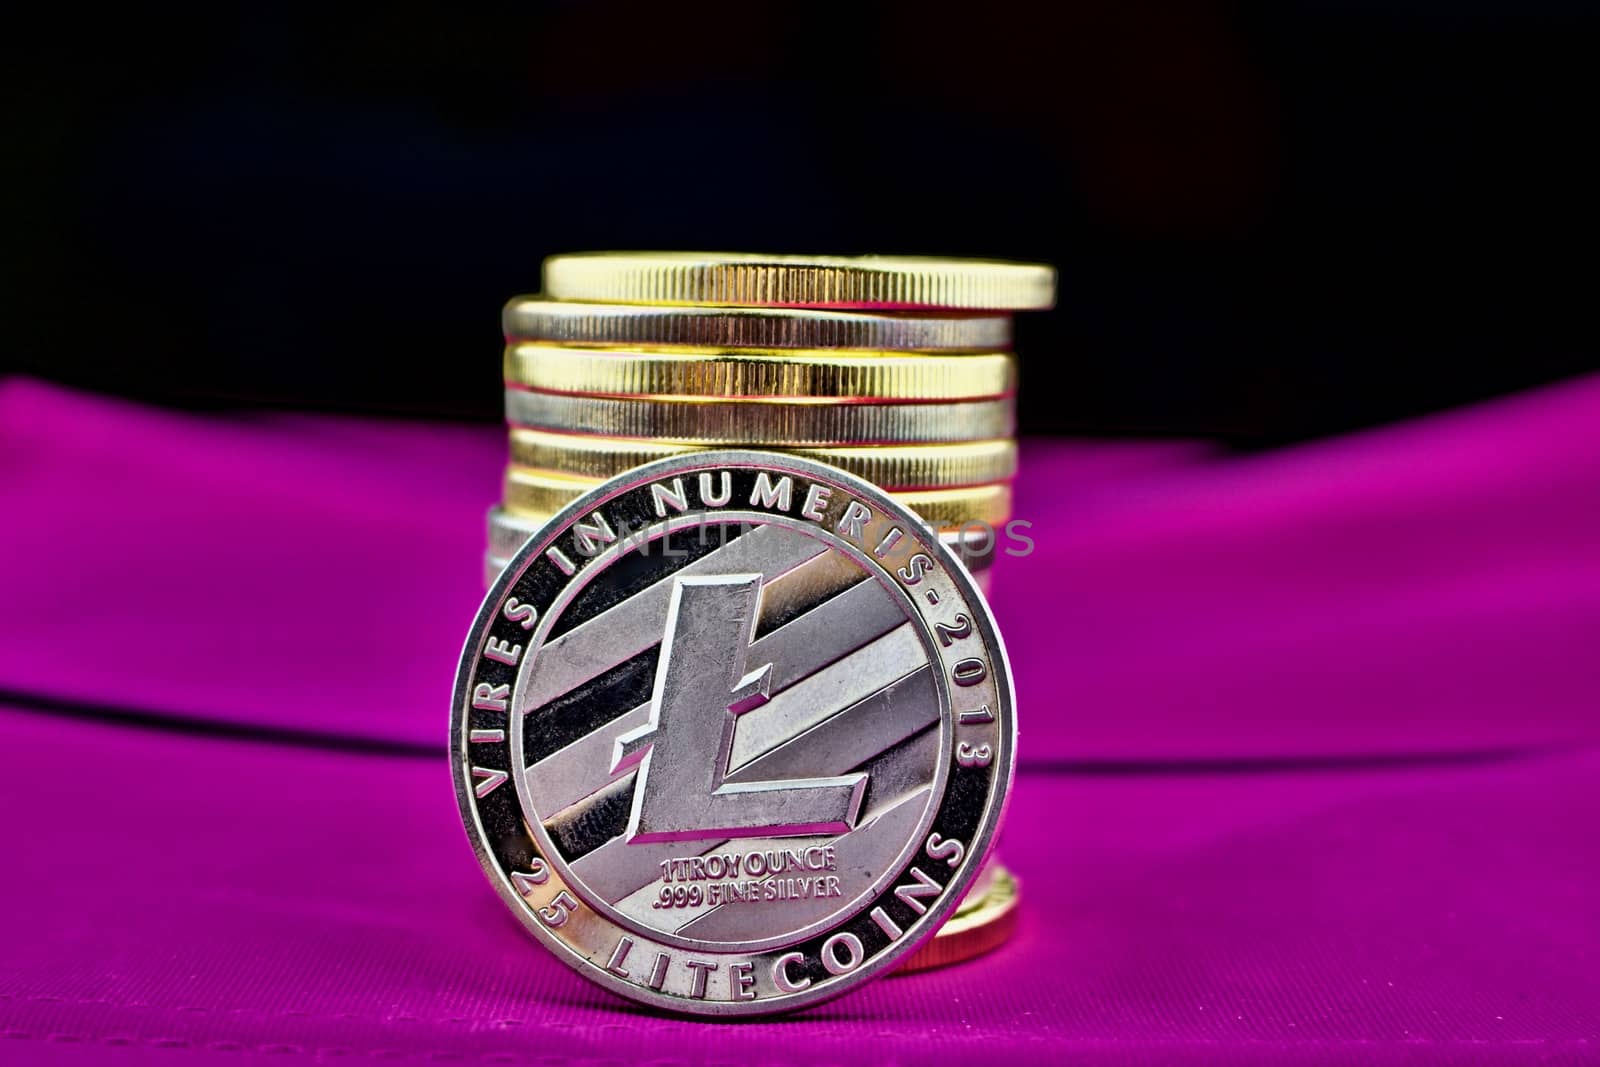 Digital currency silver physical litecoin coin